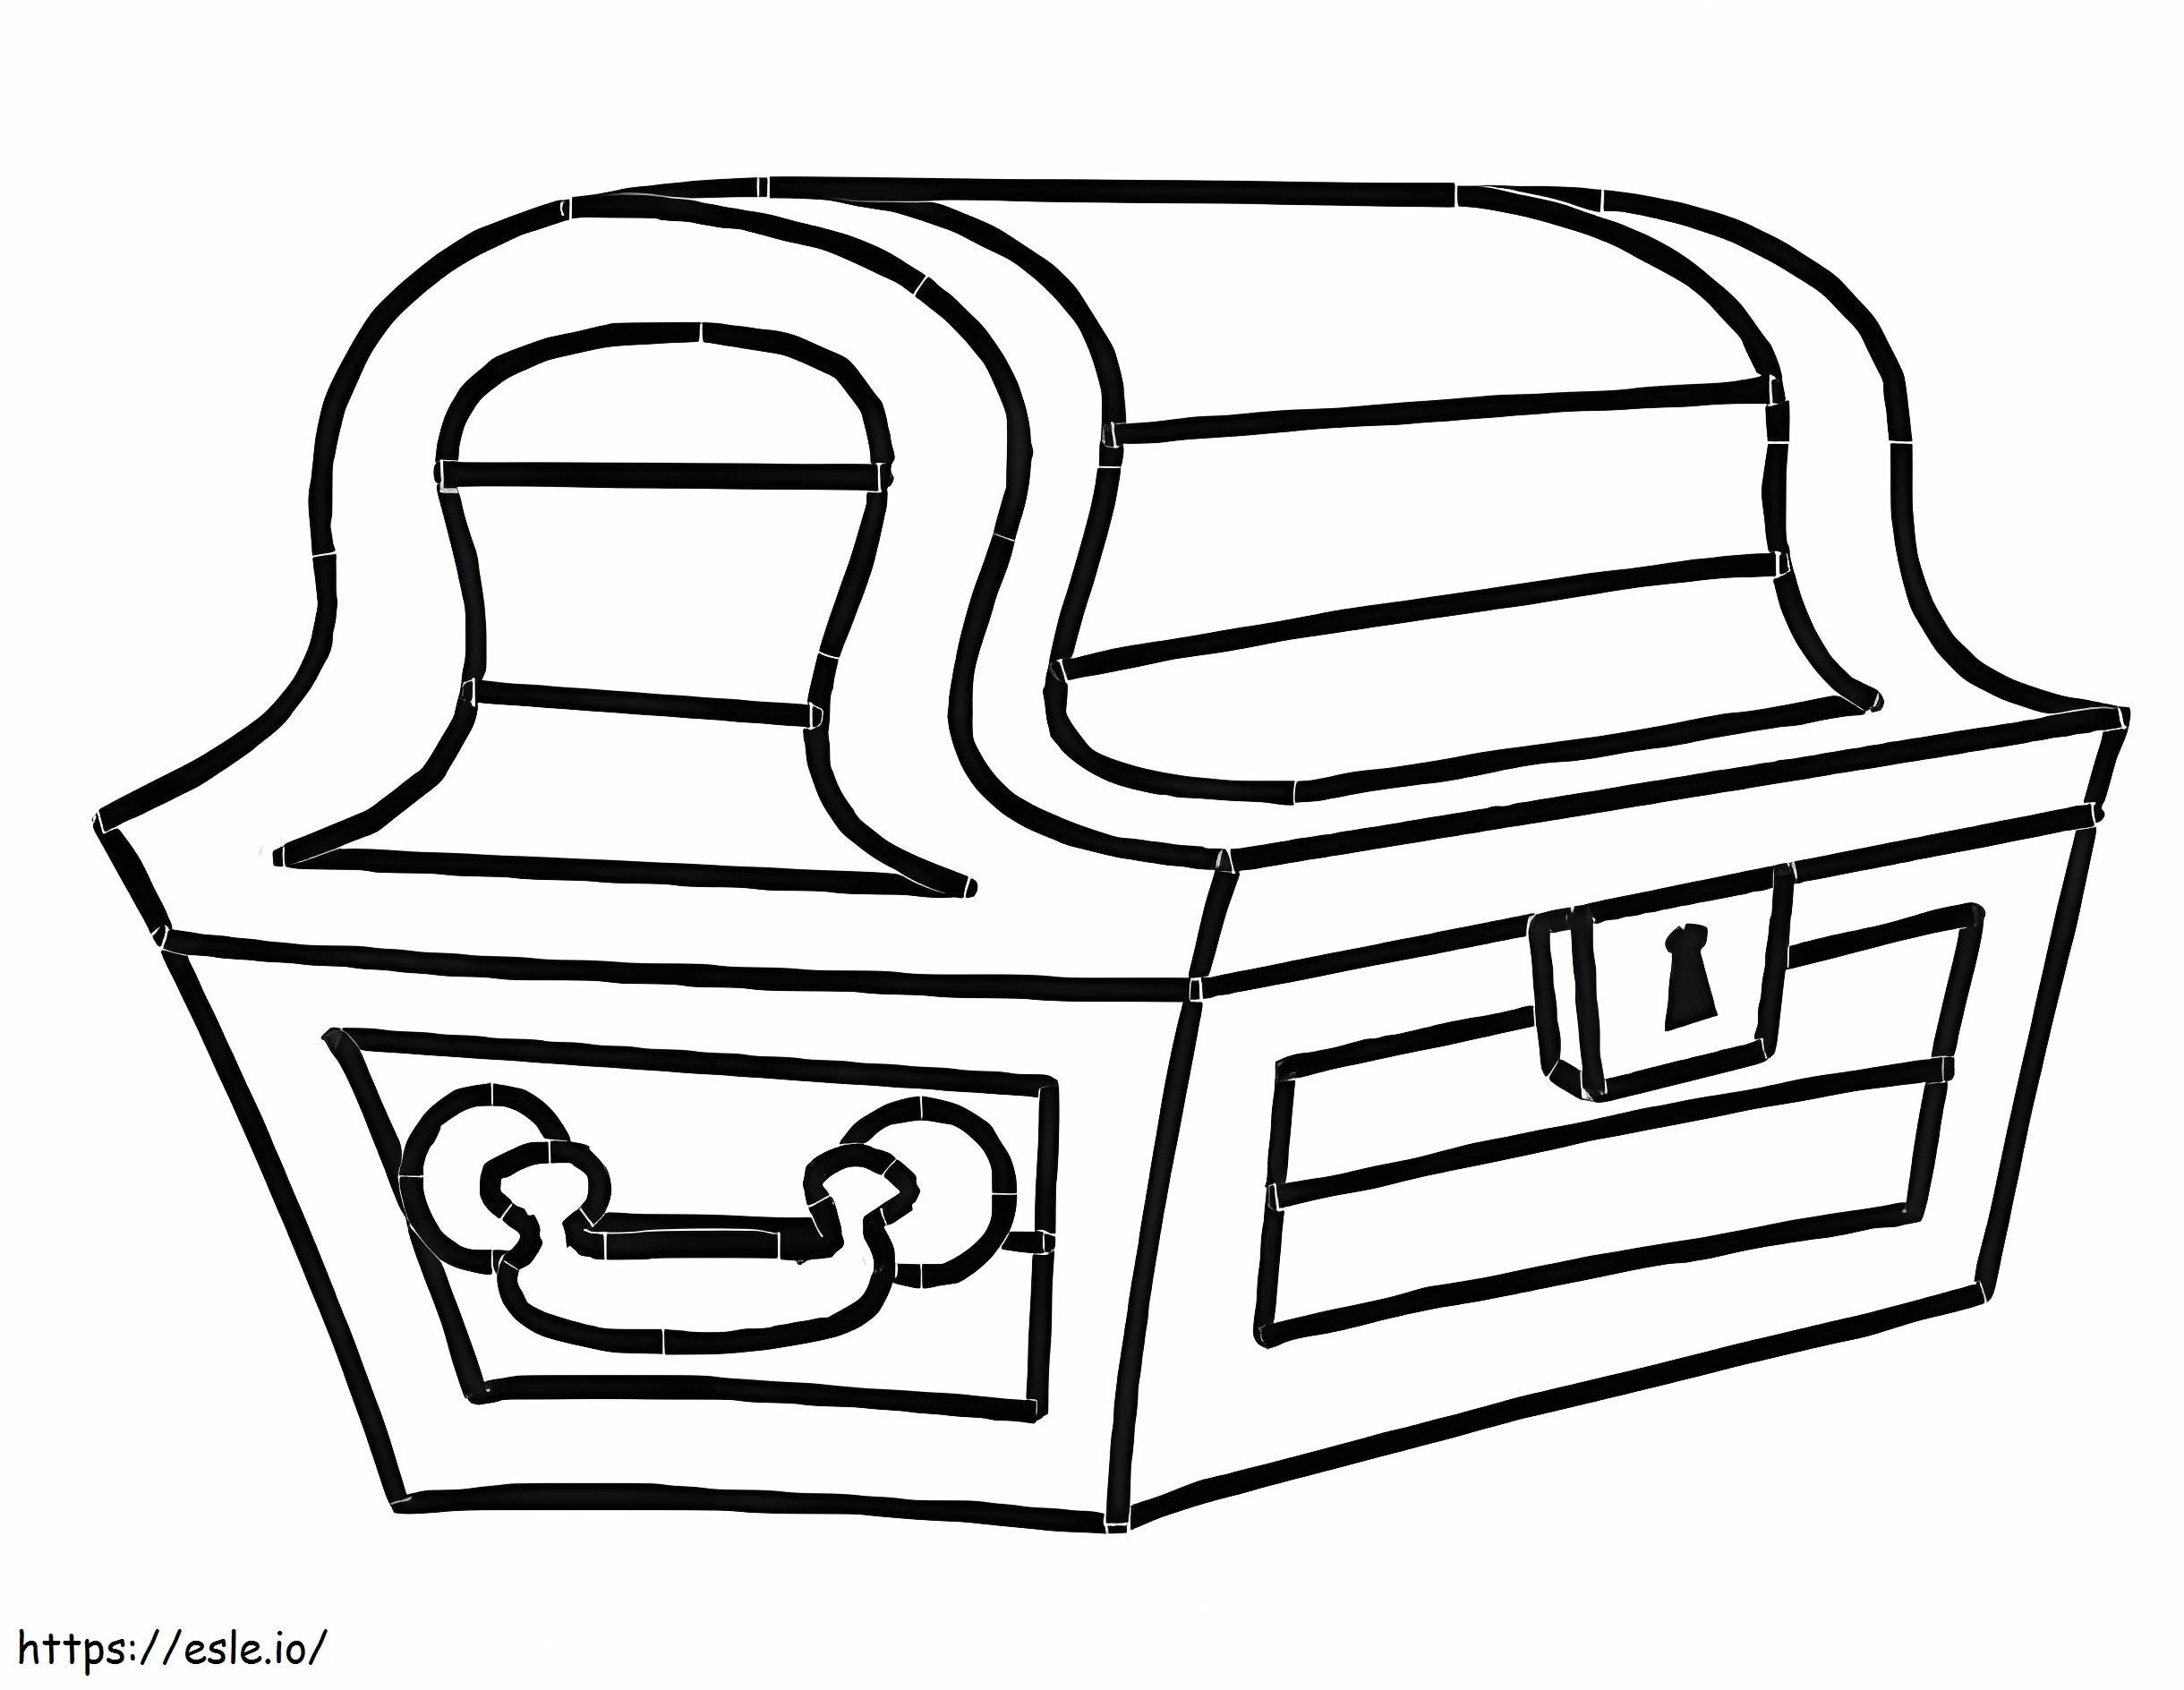 A Treasure Chest coloring page